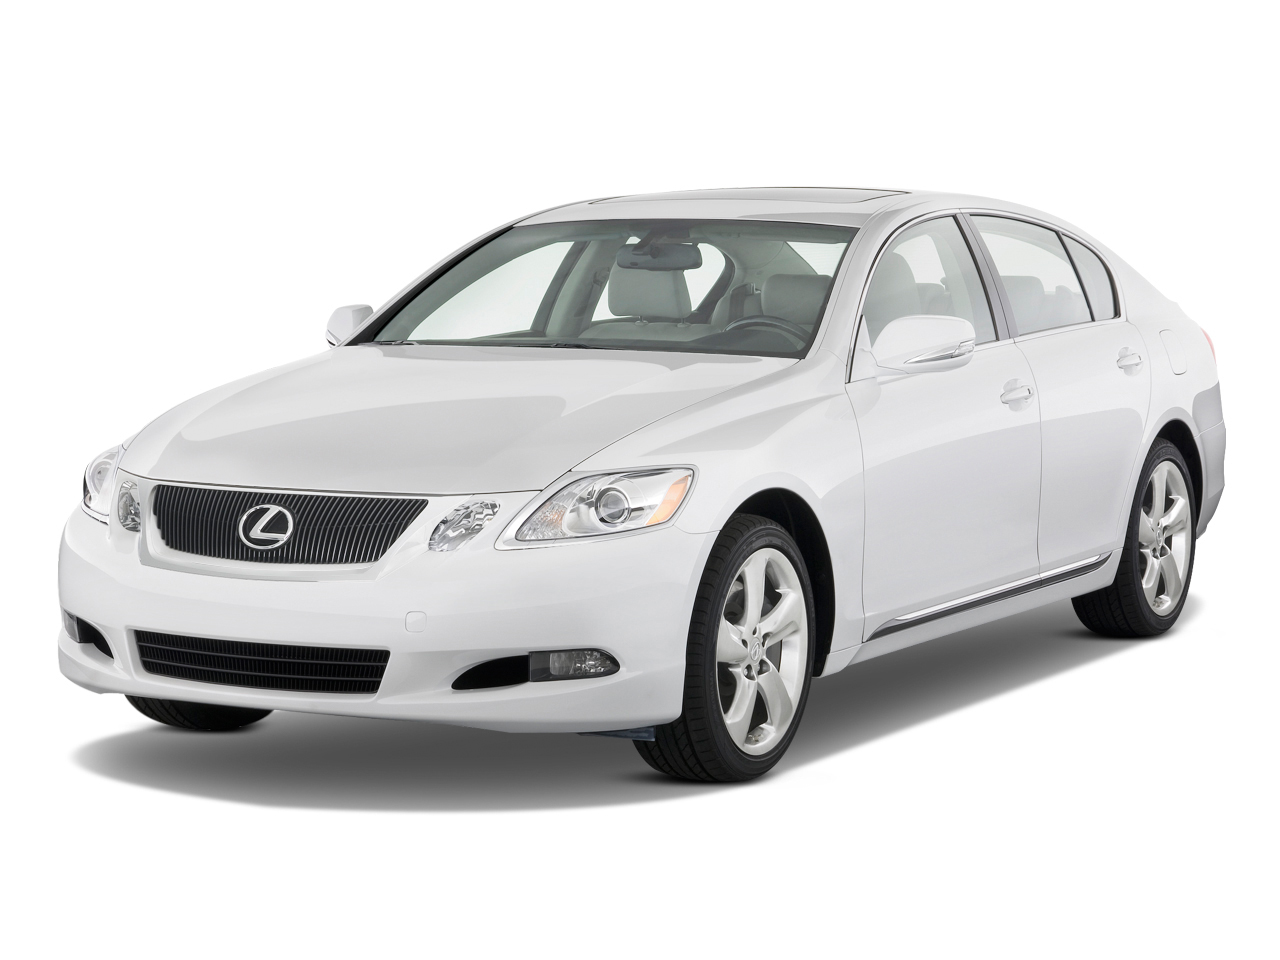 2010 Lexus Gs Review Ratings Specs Prices And Photos